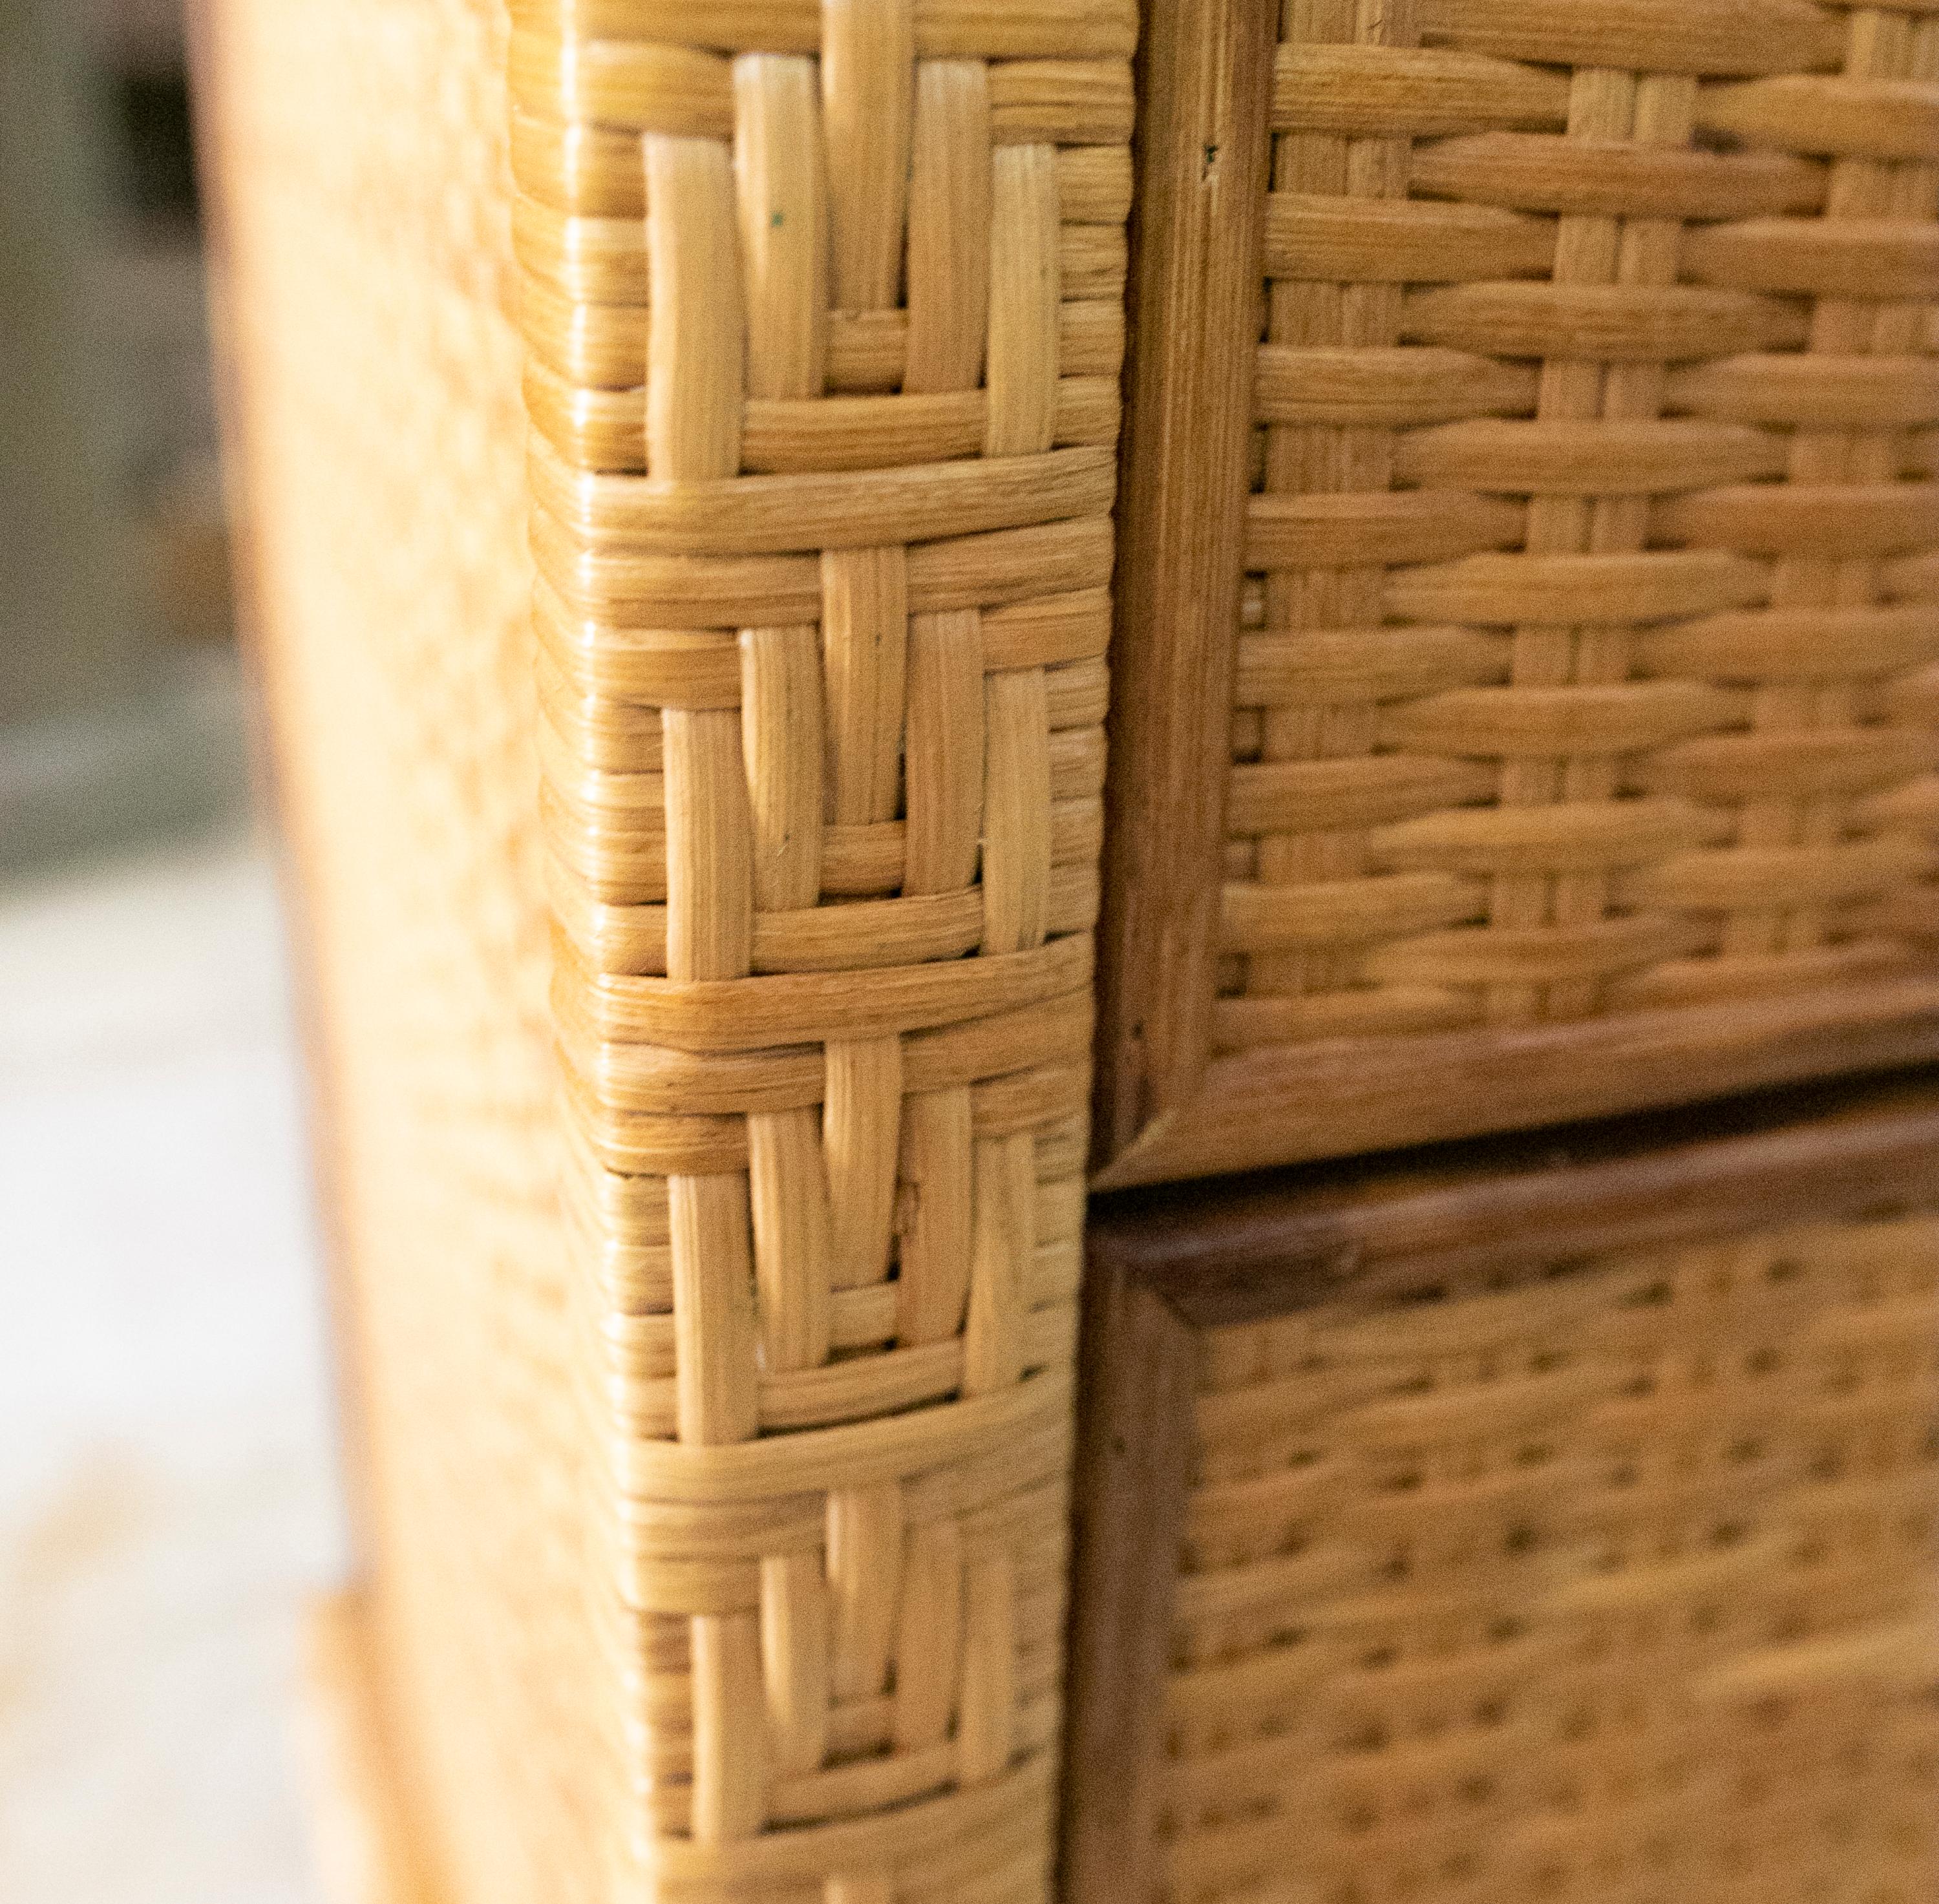 1980s Handmade Wicker Sidetable with Three Drawers For Sale 9